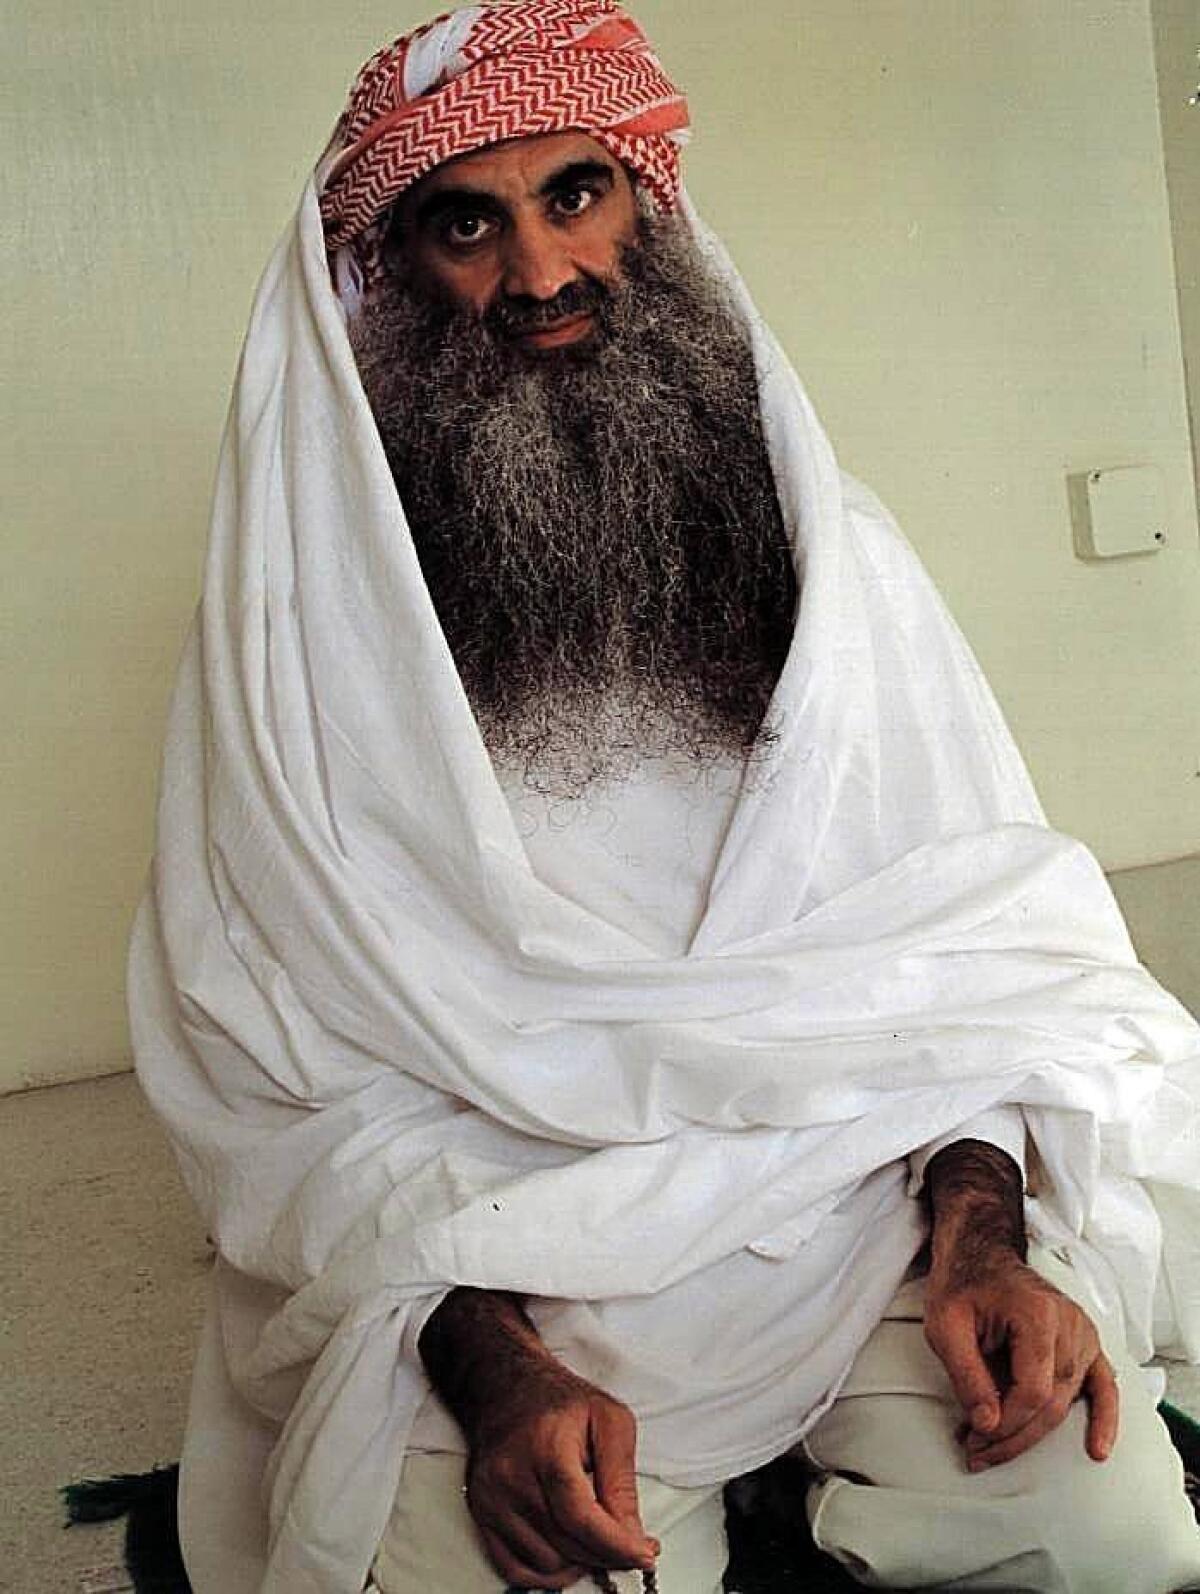 Khalid Shaikh Mohammed, pictured in July 2009 at Guantanamo Bay, Cuba, is accused of masterminding the Sept. 11, 2001, attacks.